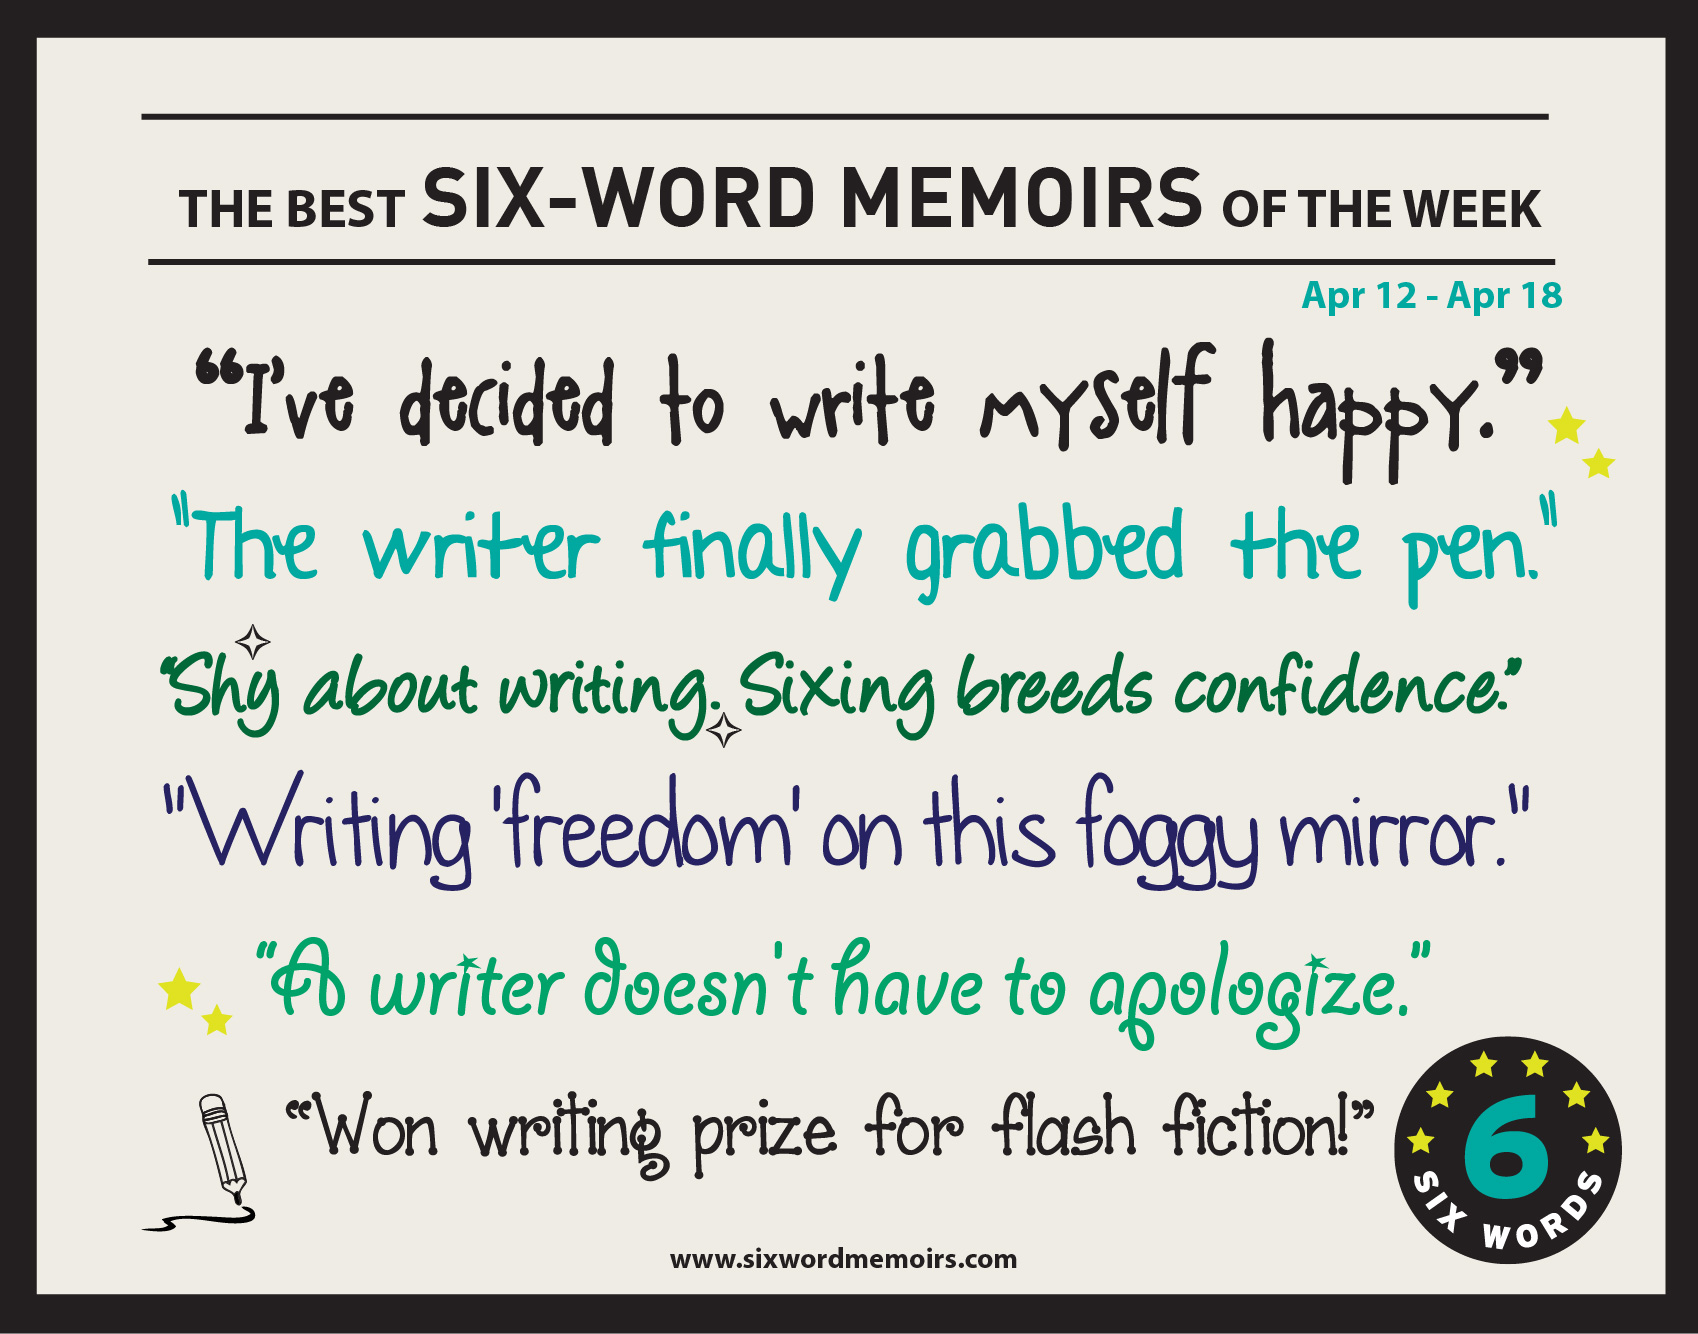 "Shy about writing. Sixing breeds confidence." Best Six ...